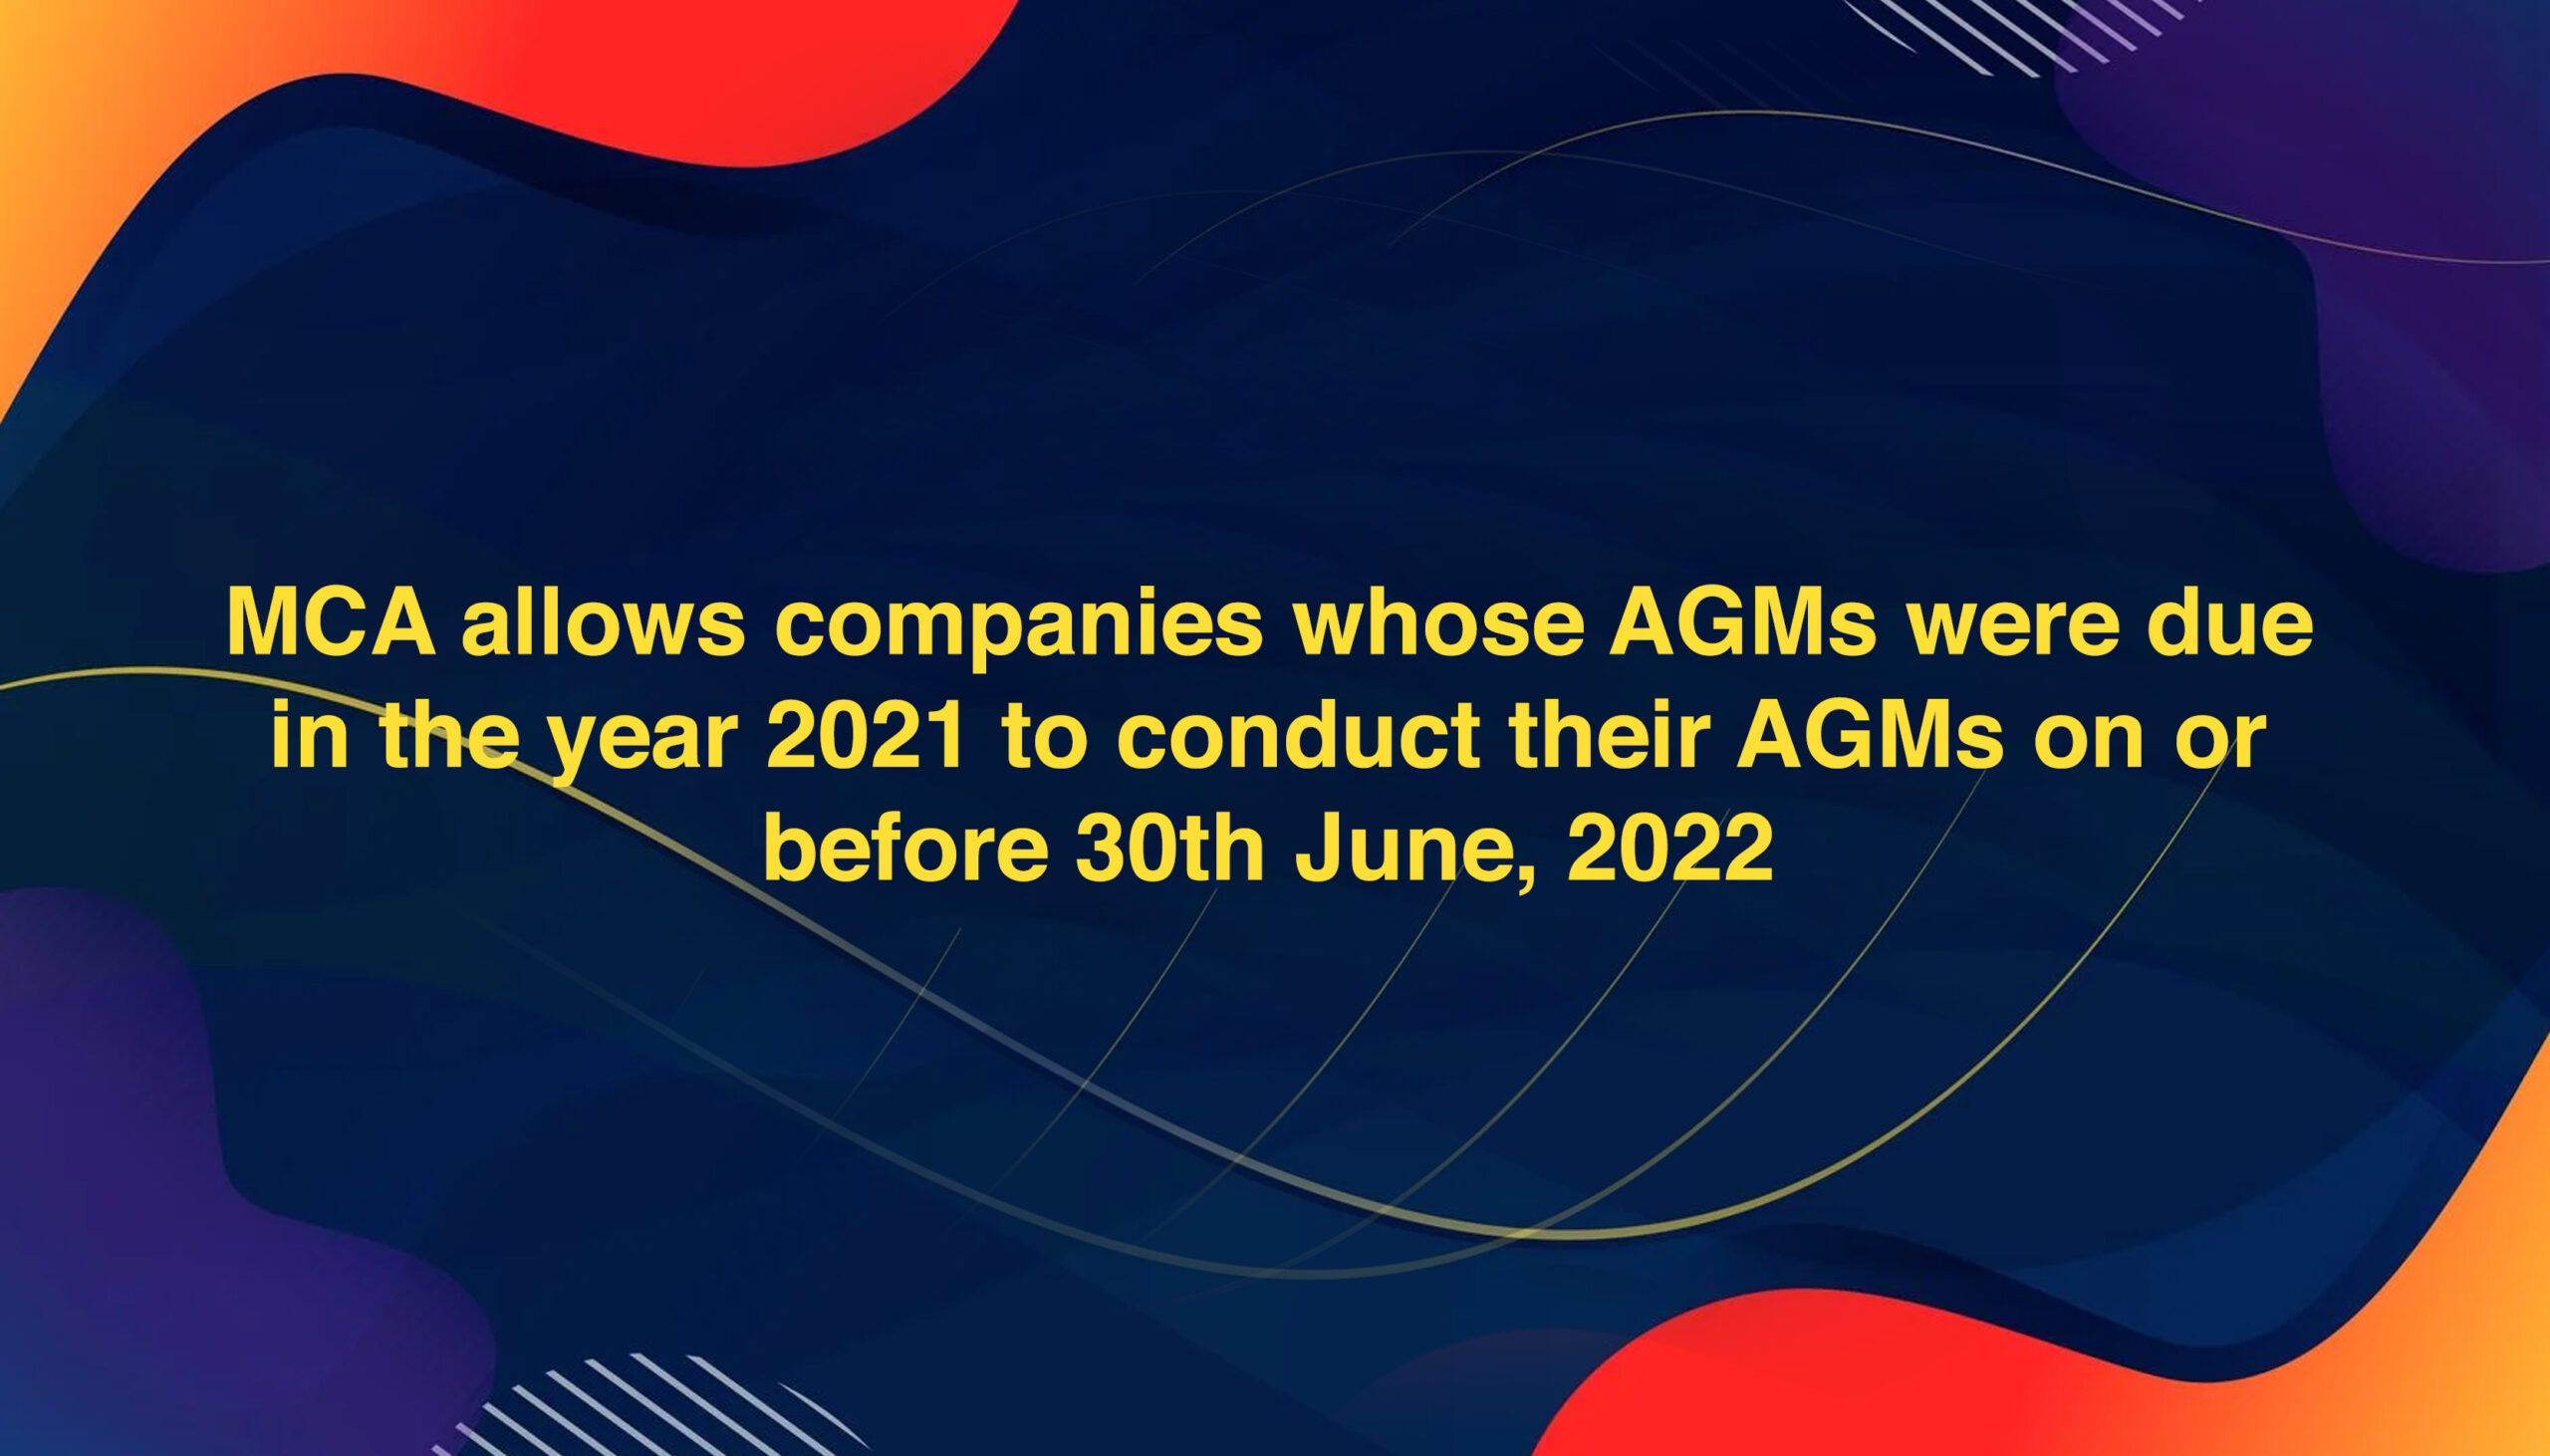 MCA allows companies whose AGMs were due in the year 2021 to conduct their AGMs on or before 30th June, 2022